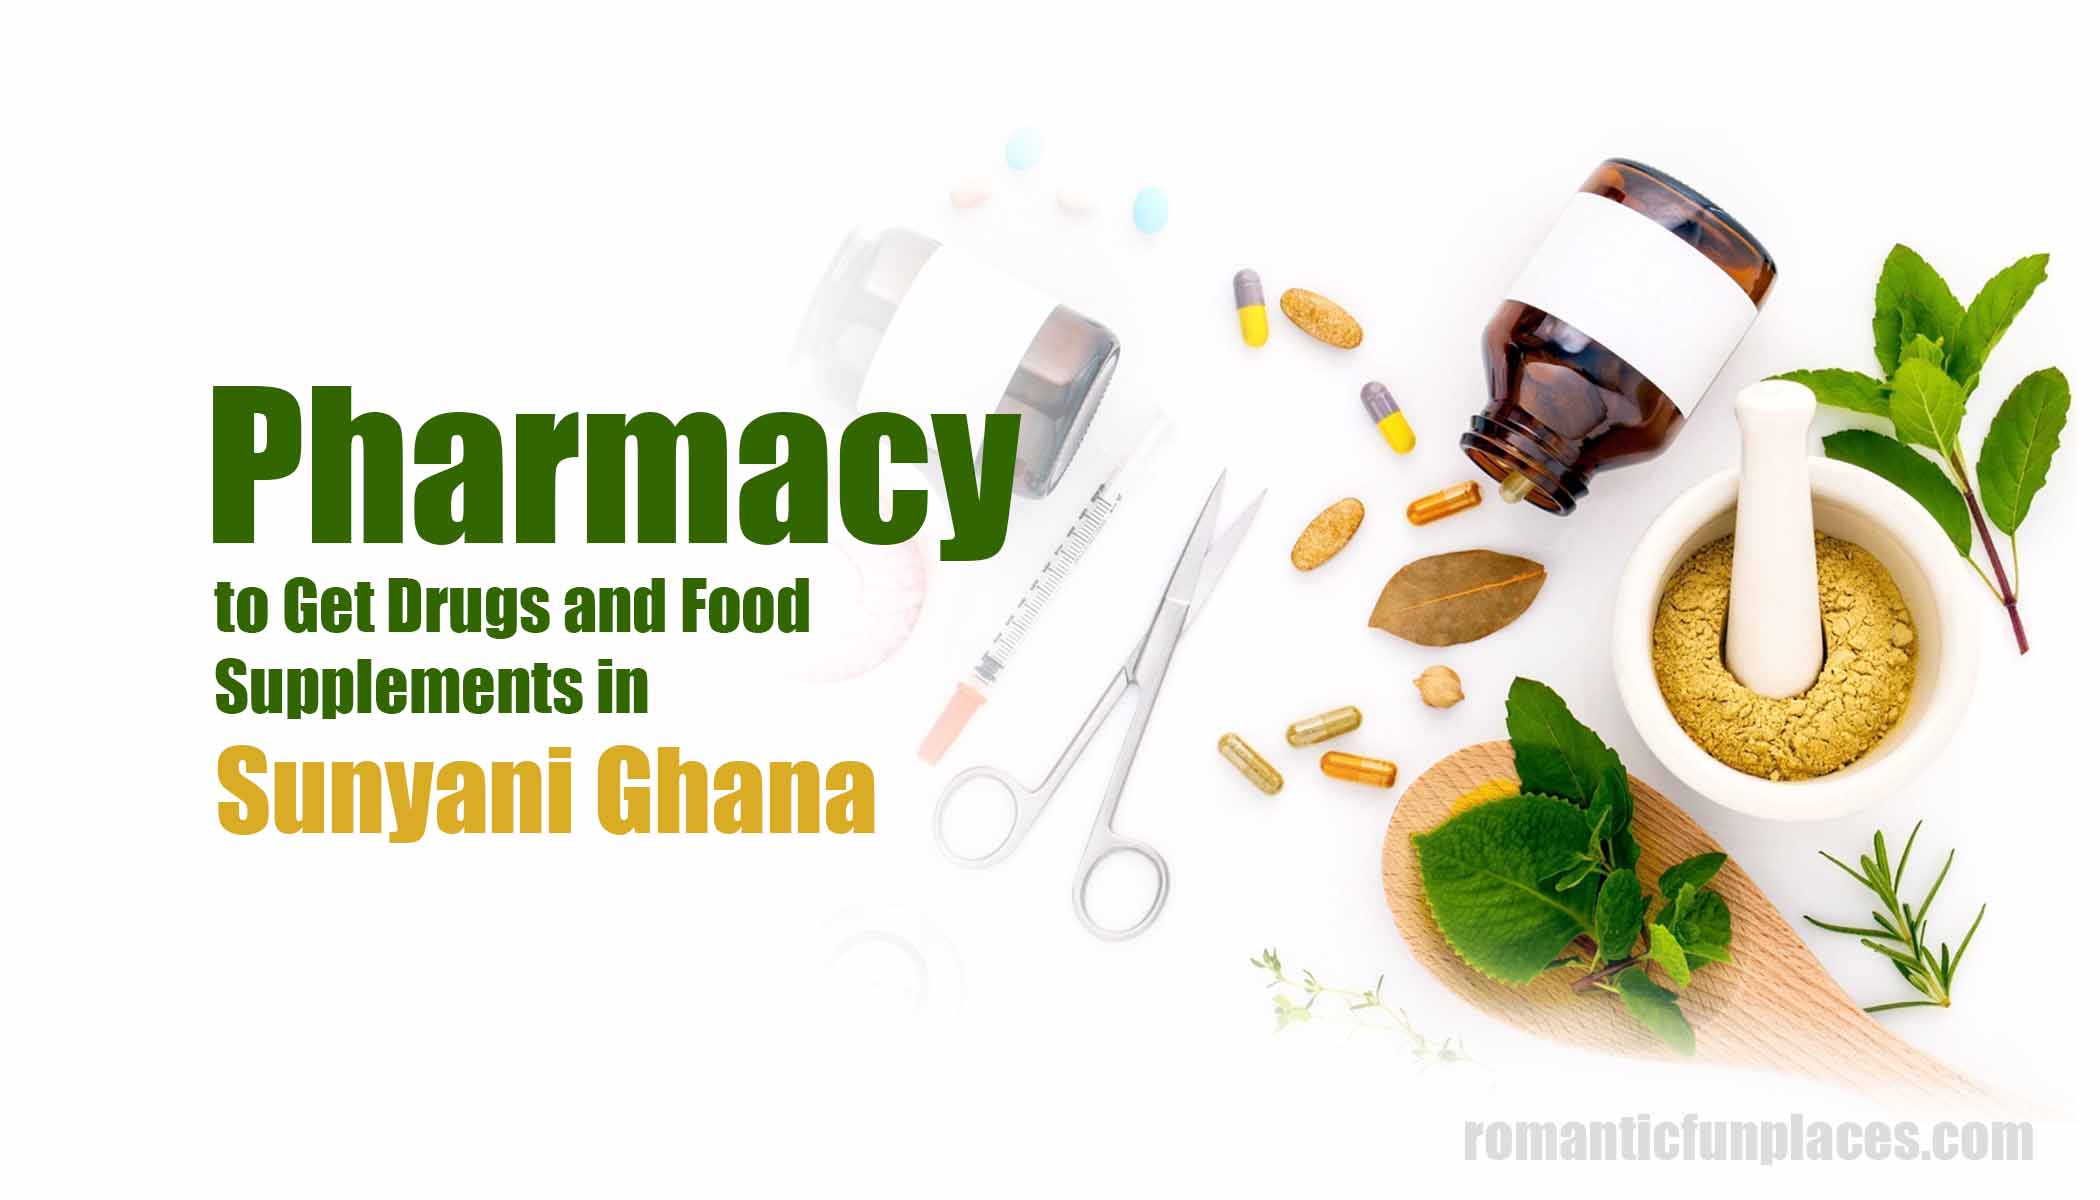 Pharmacy to Get Drugs and Food Supplements in Sunyani Ghana